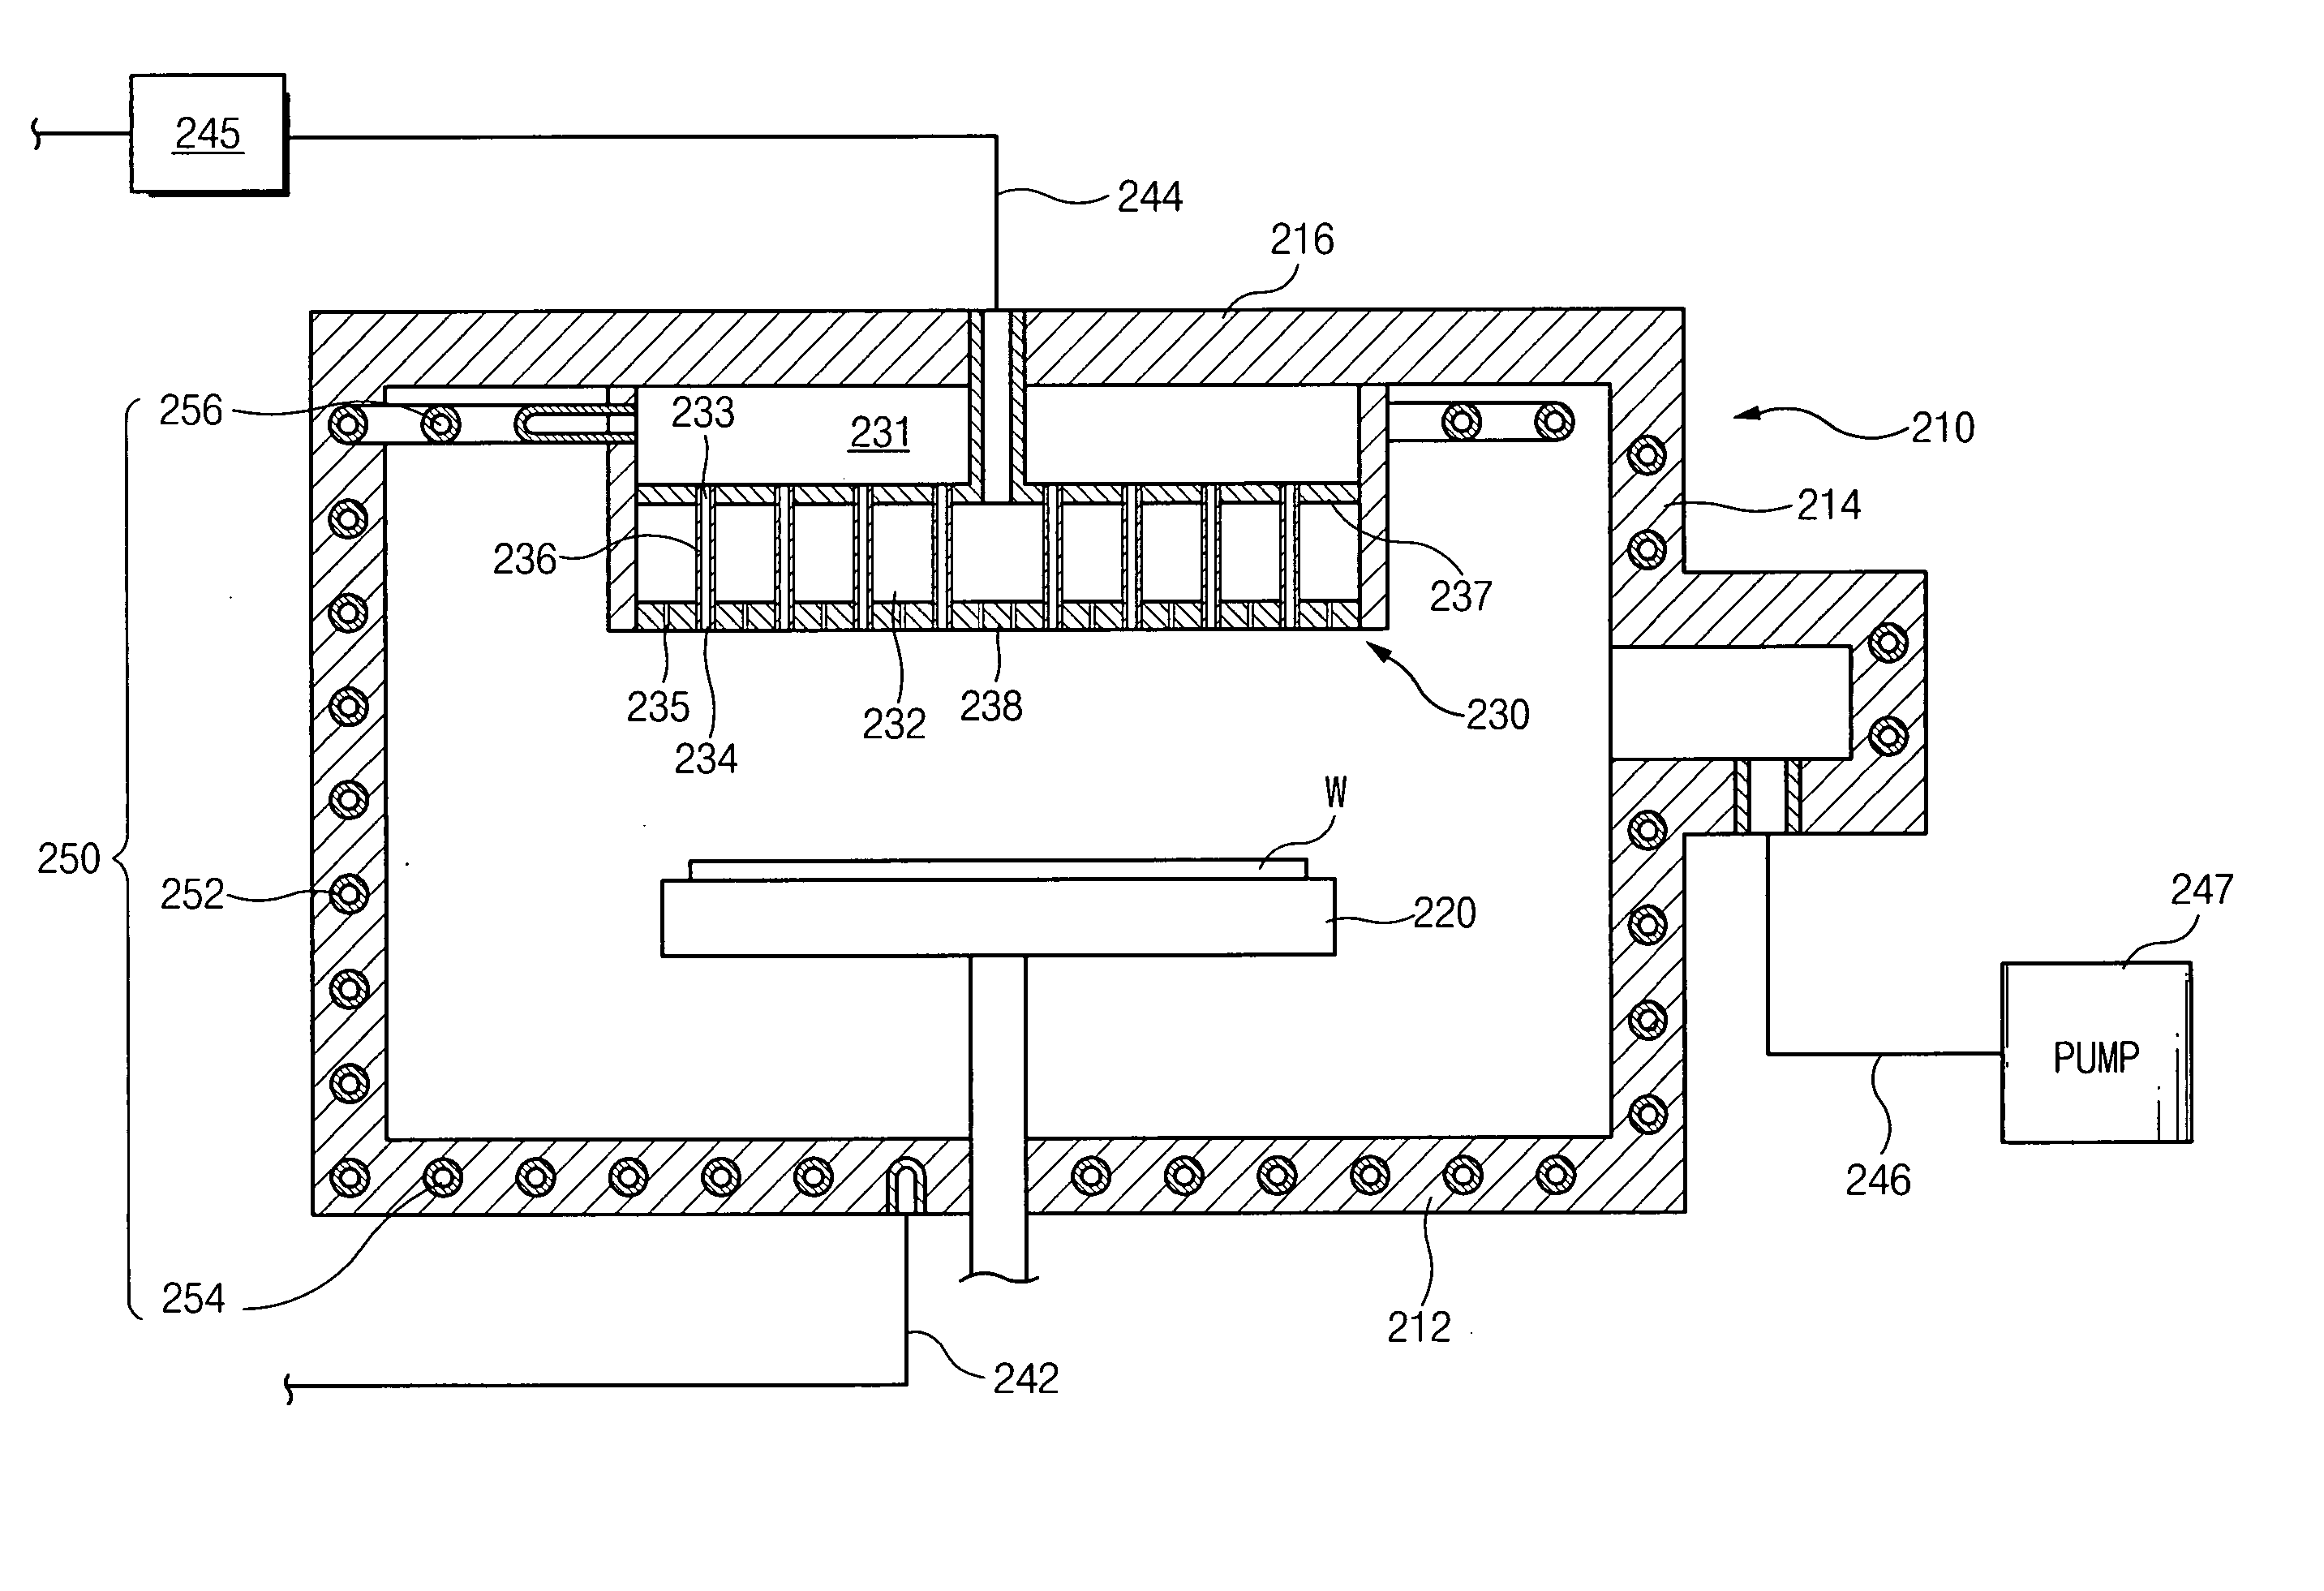 Apparatus for fabricating semiconductor devices, heating arrangement, shower head arrangement, method of reducing thermal disturbance during fabrication of a semiconductor device, and method of exchanging heat during fabrication of a semiconductor device